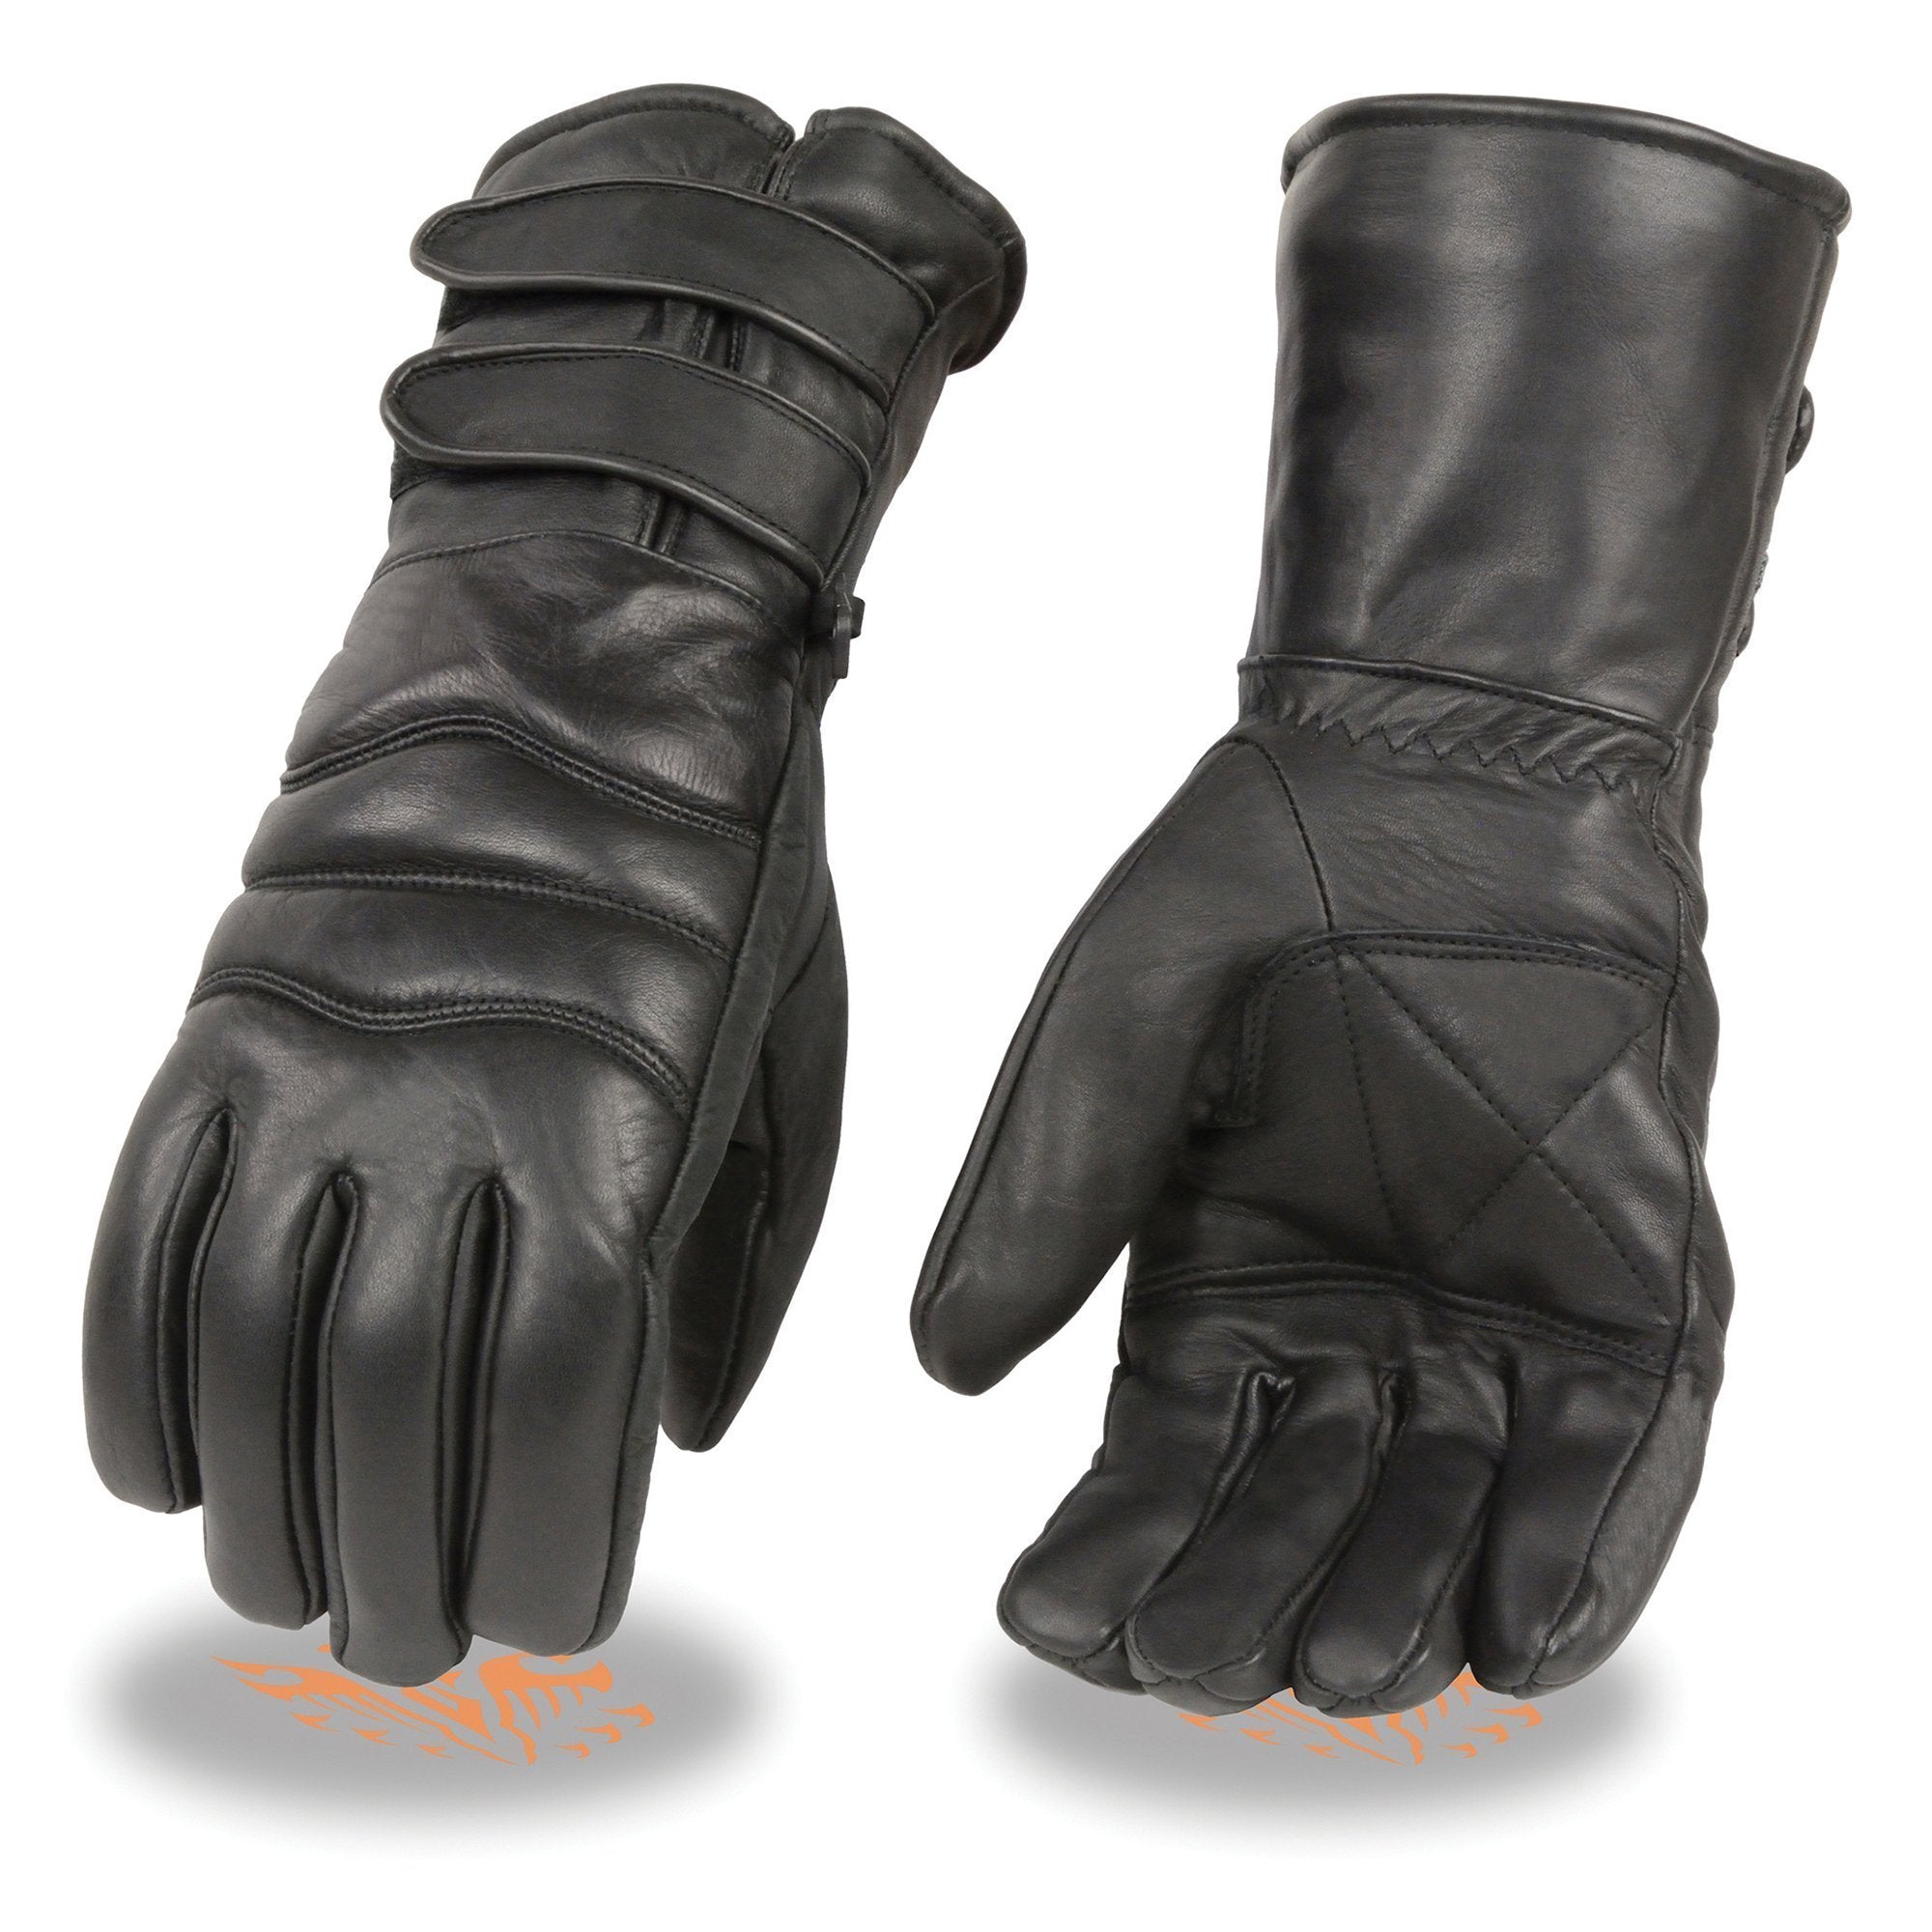 Xelement XG233 Men's Black Leather Gauntlet Gloves with Double Strap